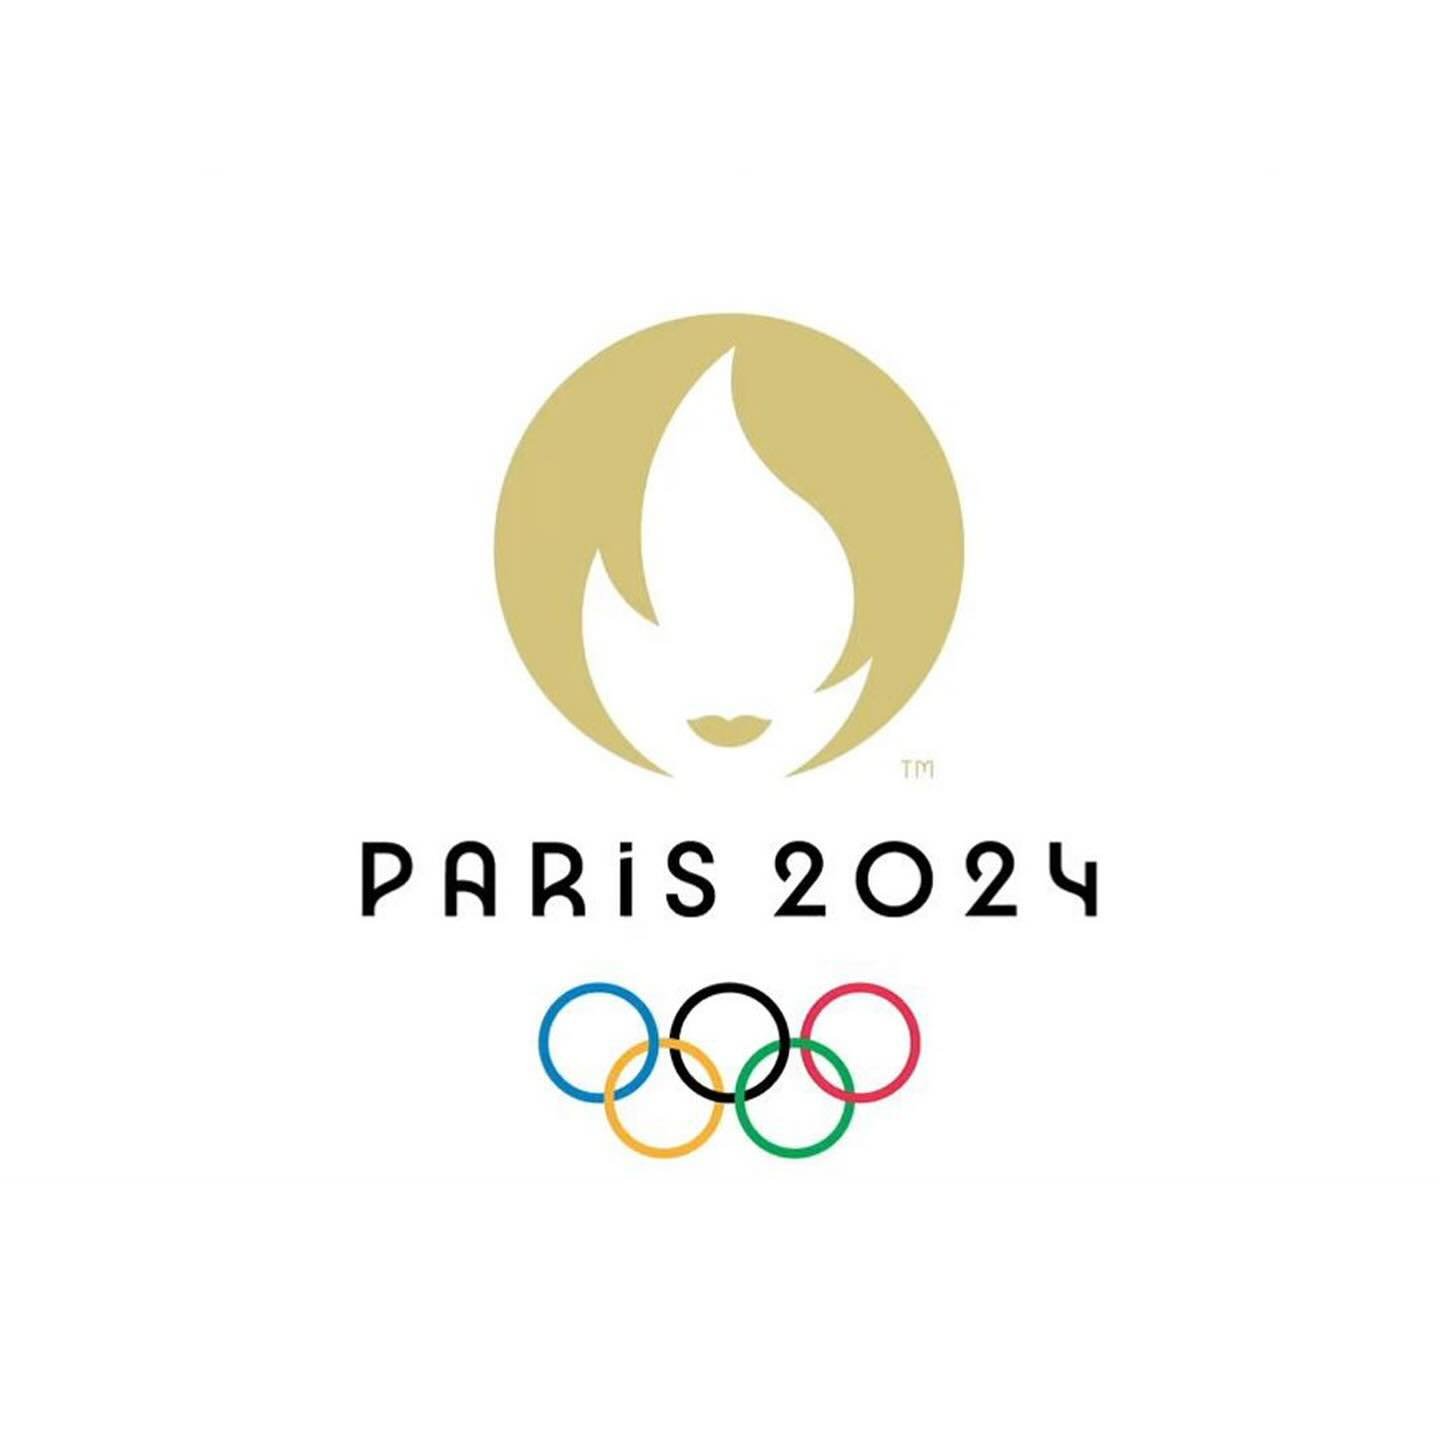 Had the insanely incredible opportunity to mix the Paris 2024 Olympic Anthem composed by the genious @victor_le_masne , the Composer and Musical Director of all the Olympic ceremonies this summer. 

Such an ambitious and glorious piece of music!! So 